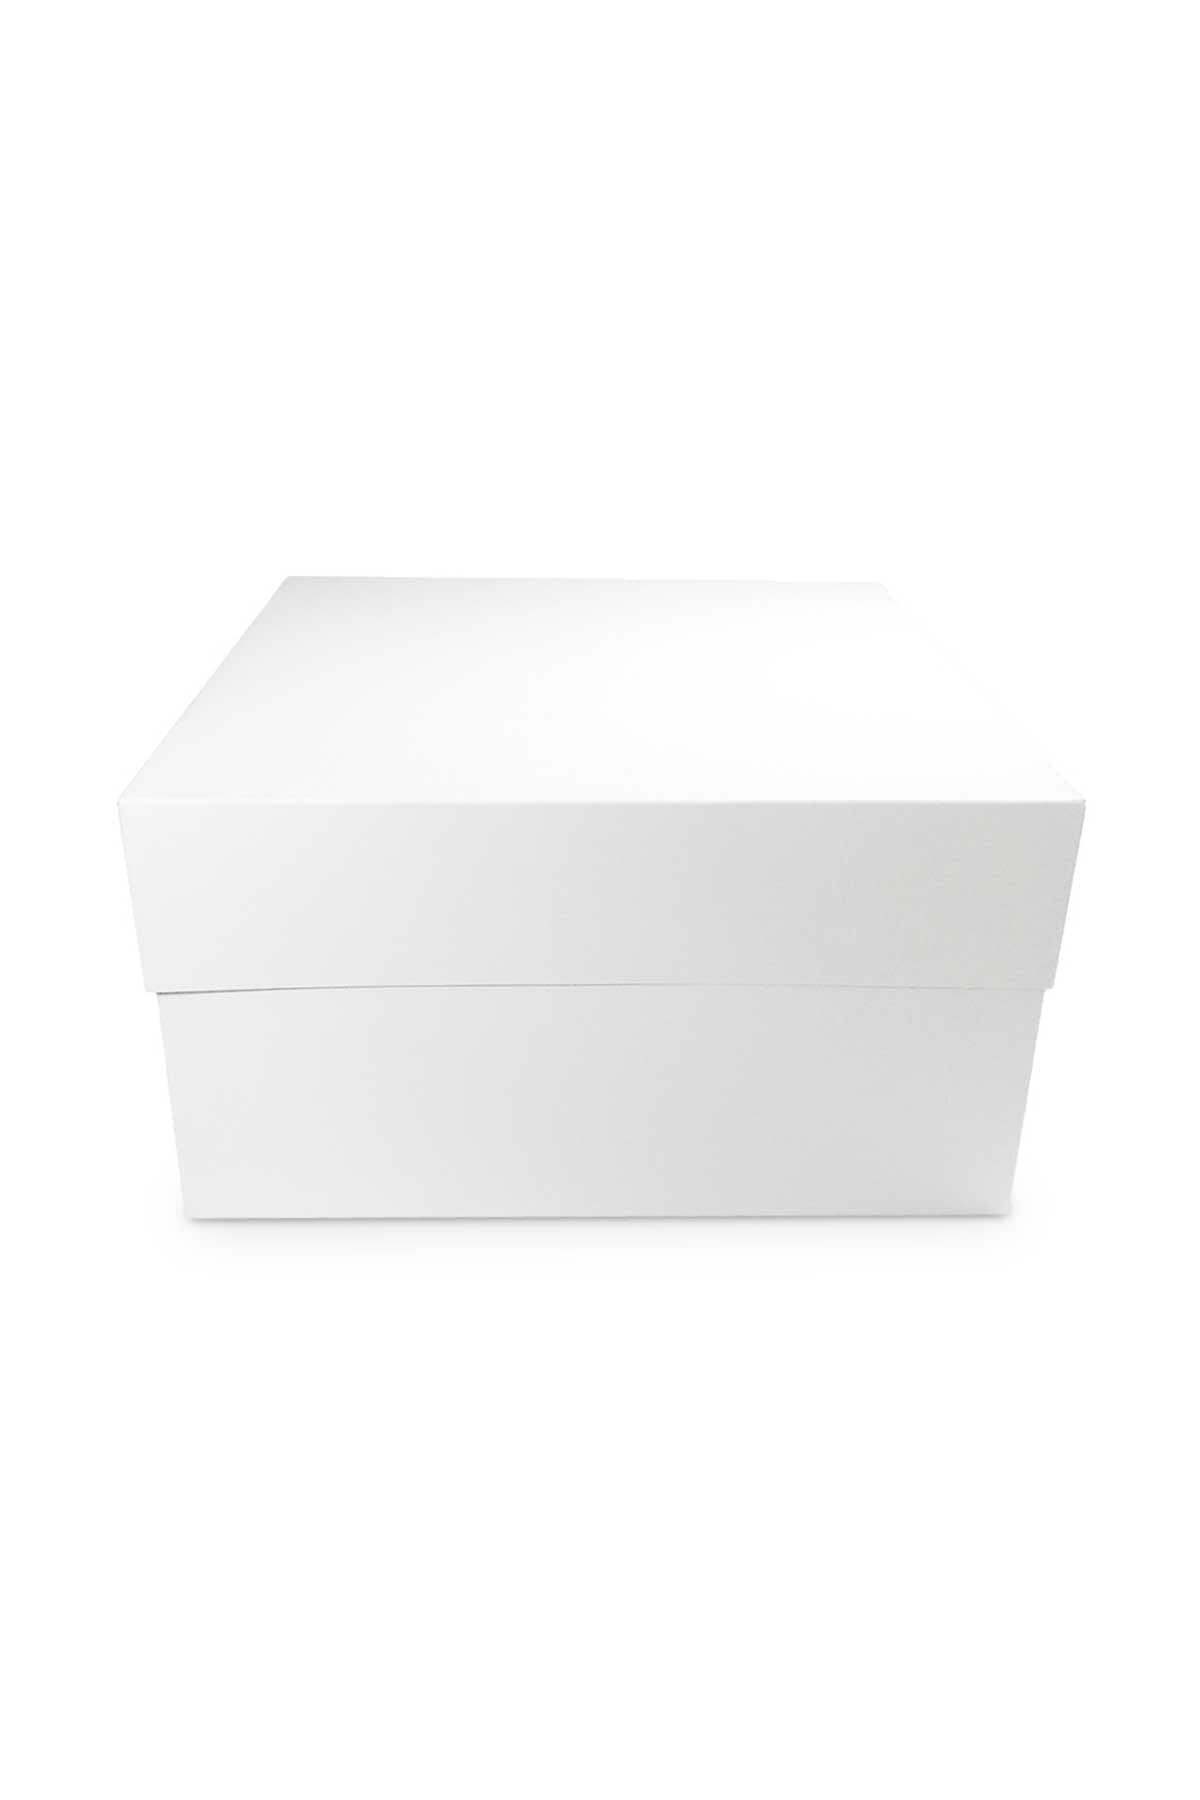 Pack of 5 - White Cake Box & Lid Cake Box Sprinkly 